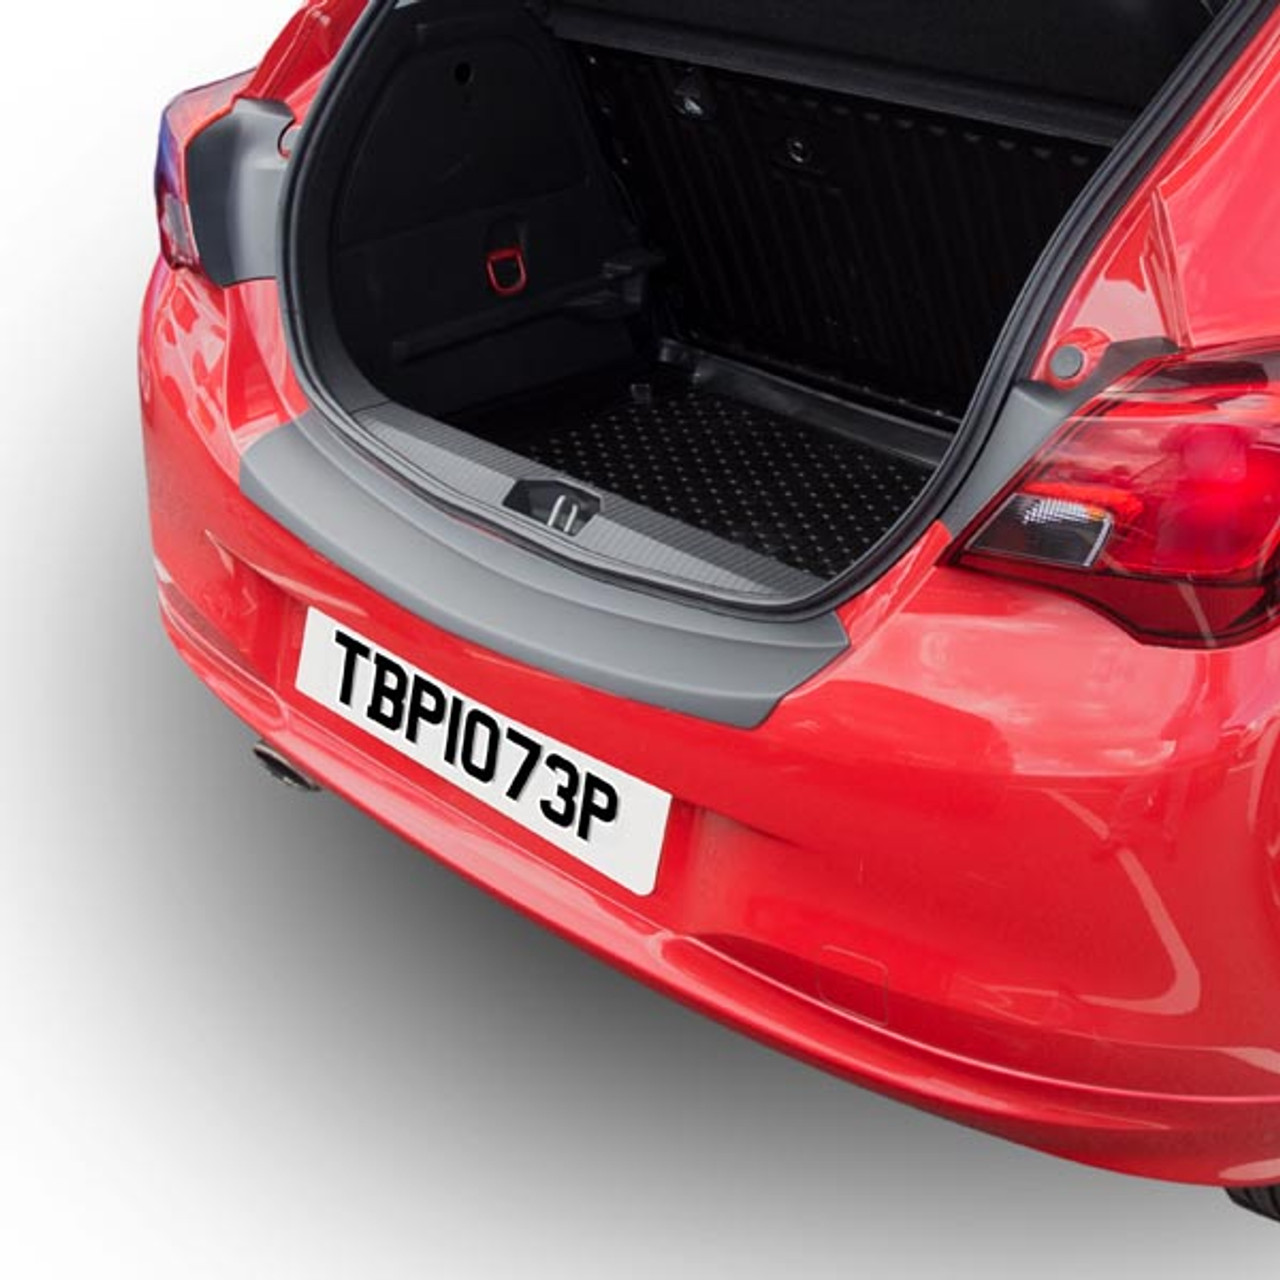 Plastic Bumper Protector for Vauxhall Corsa 2014 to 2019